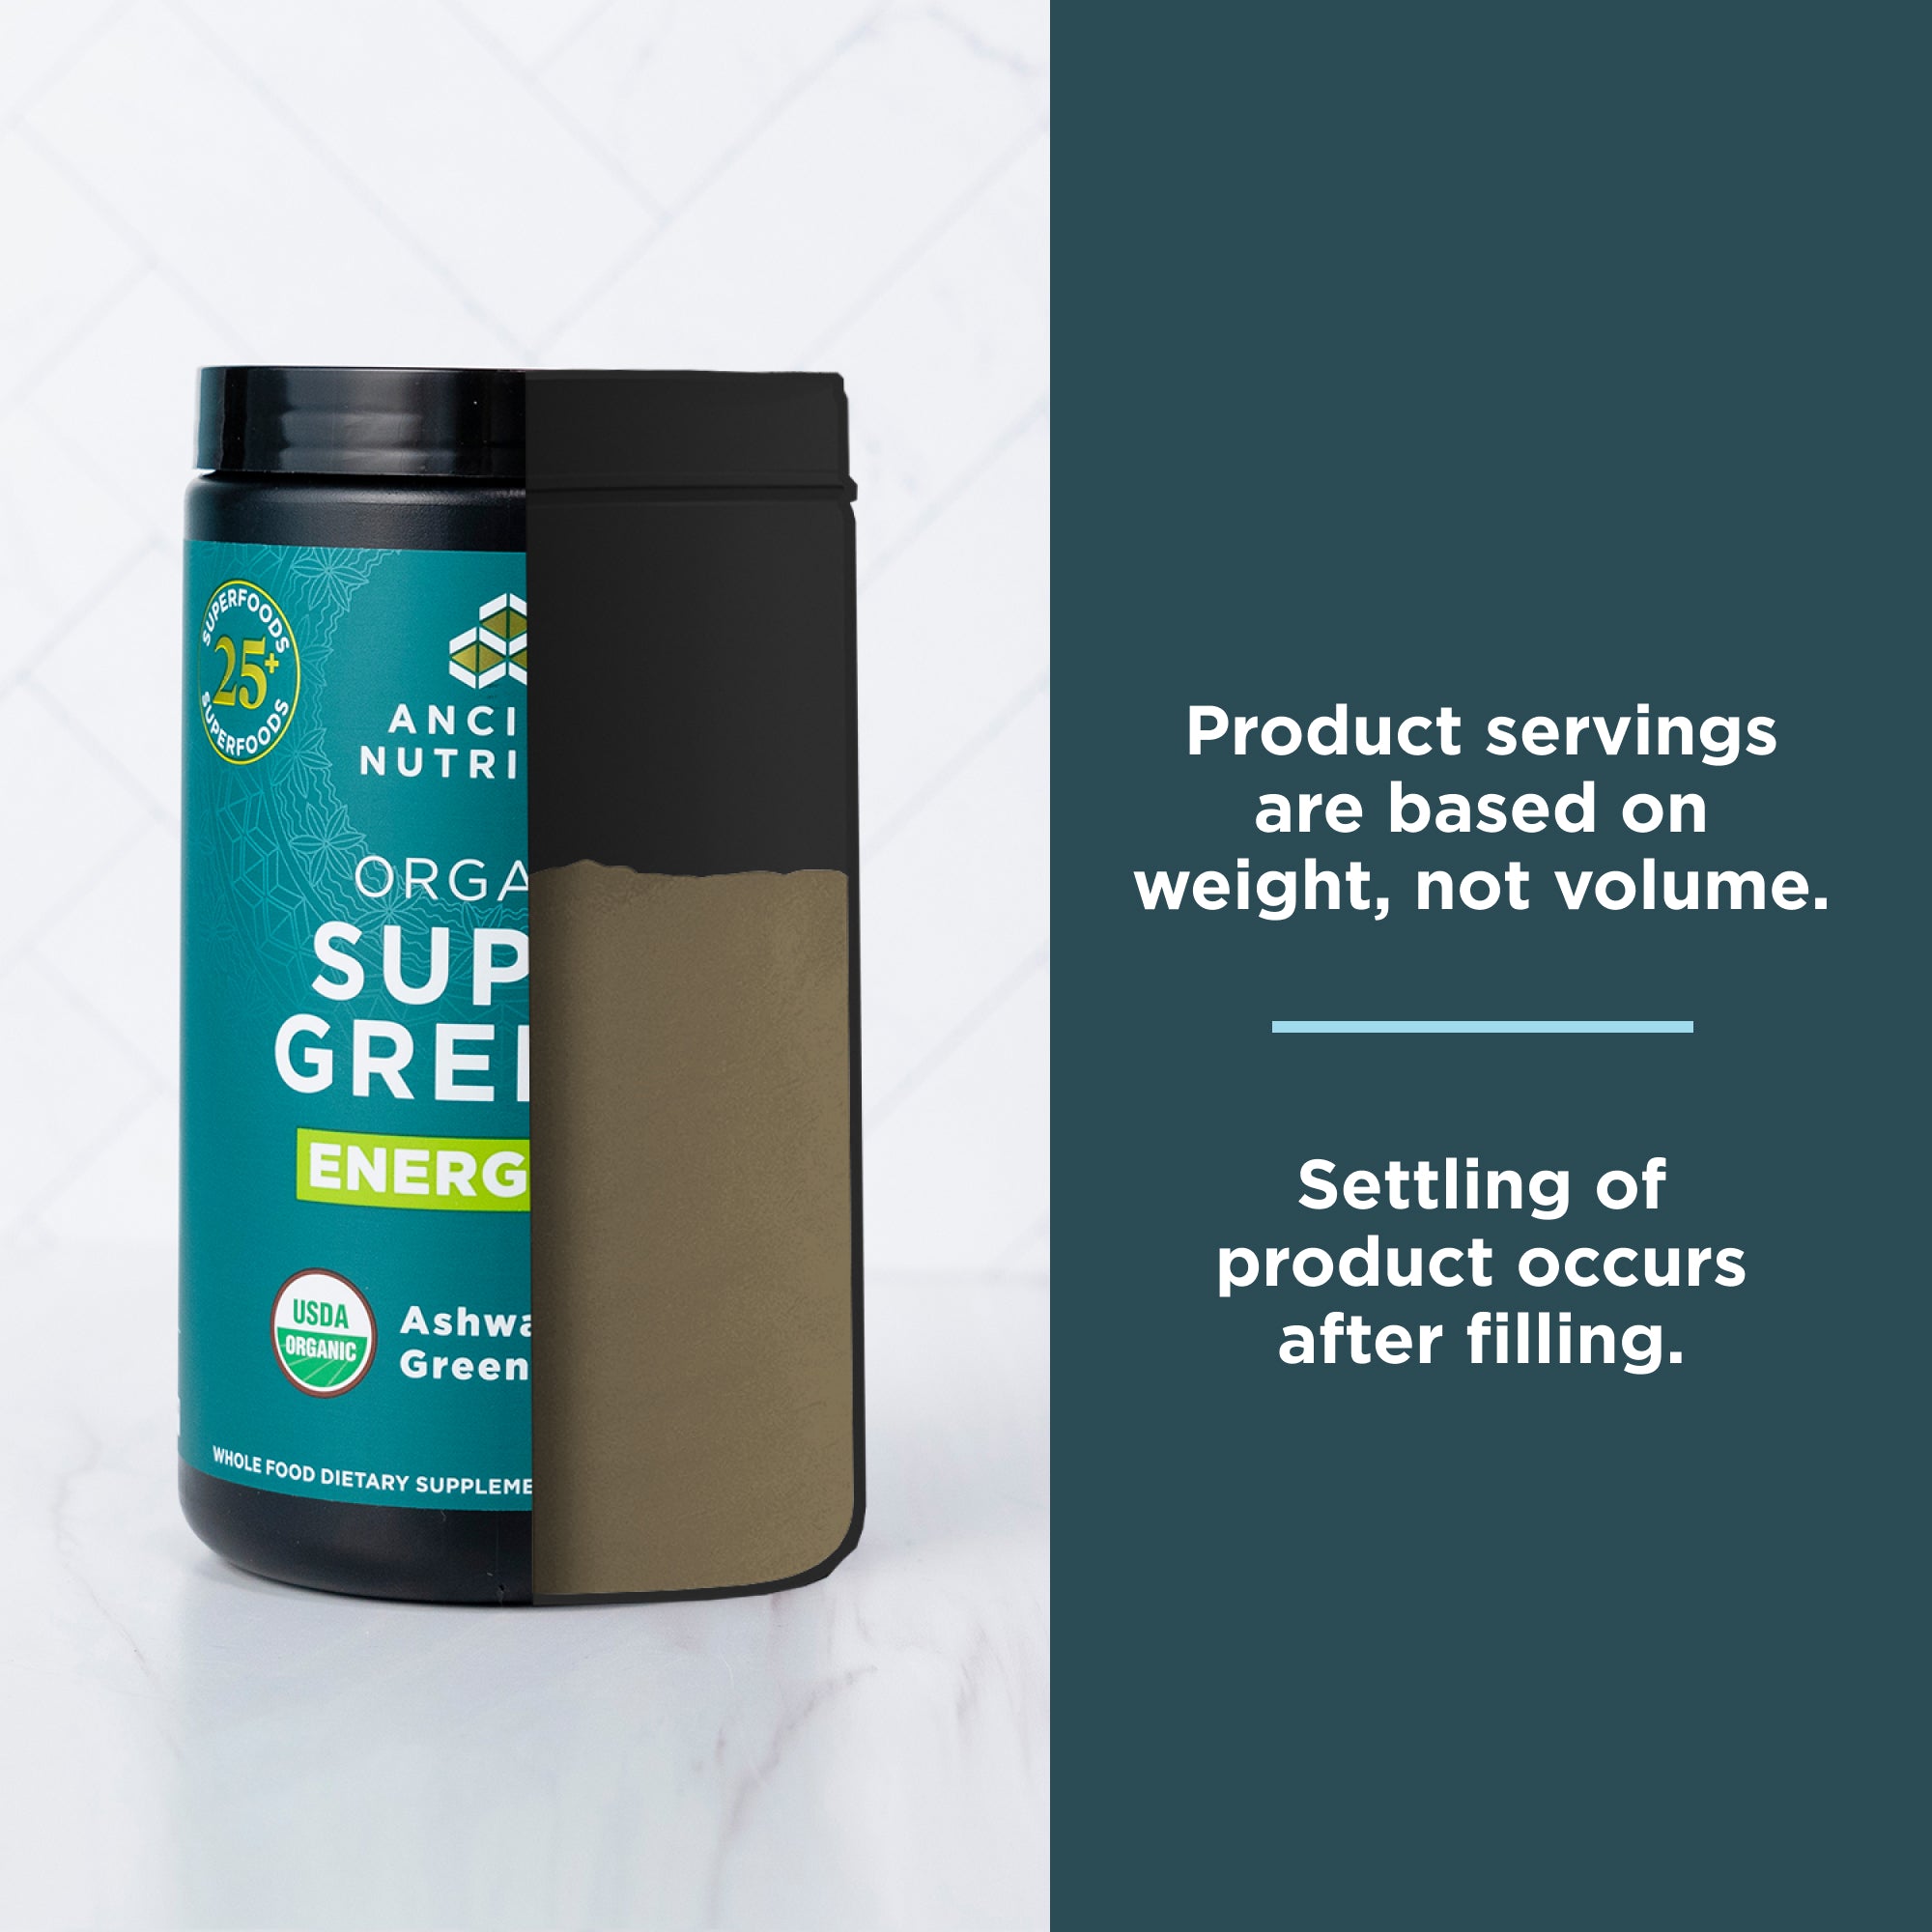 product servings are based on weight, not volume